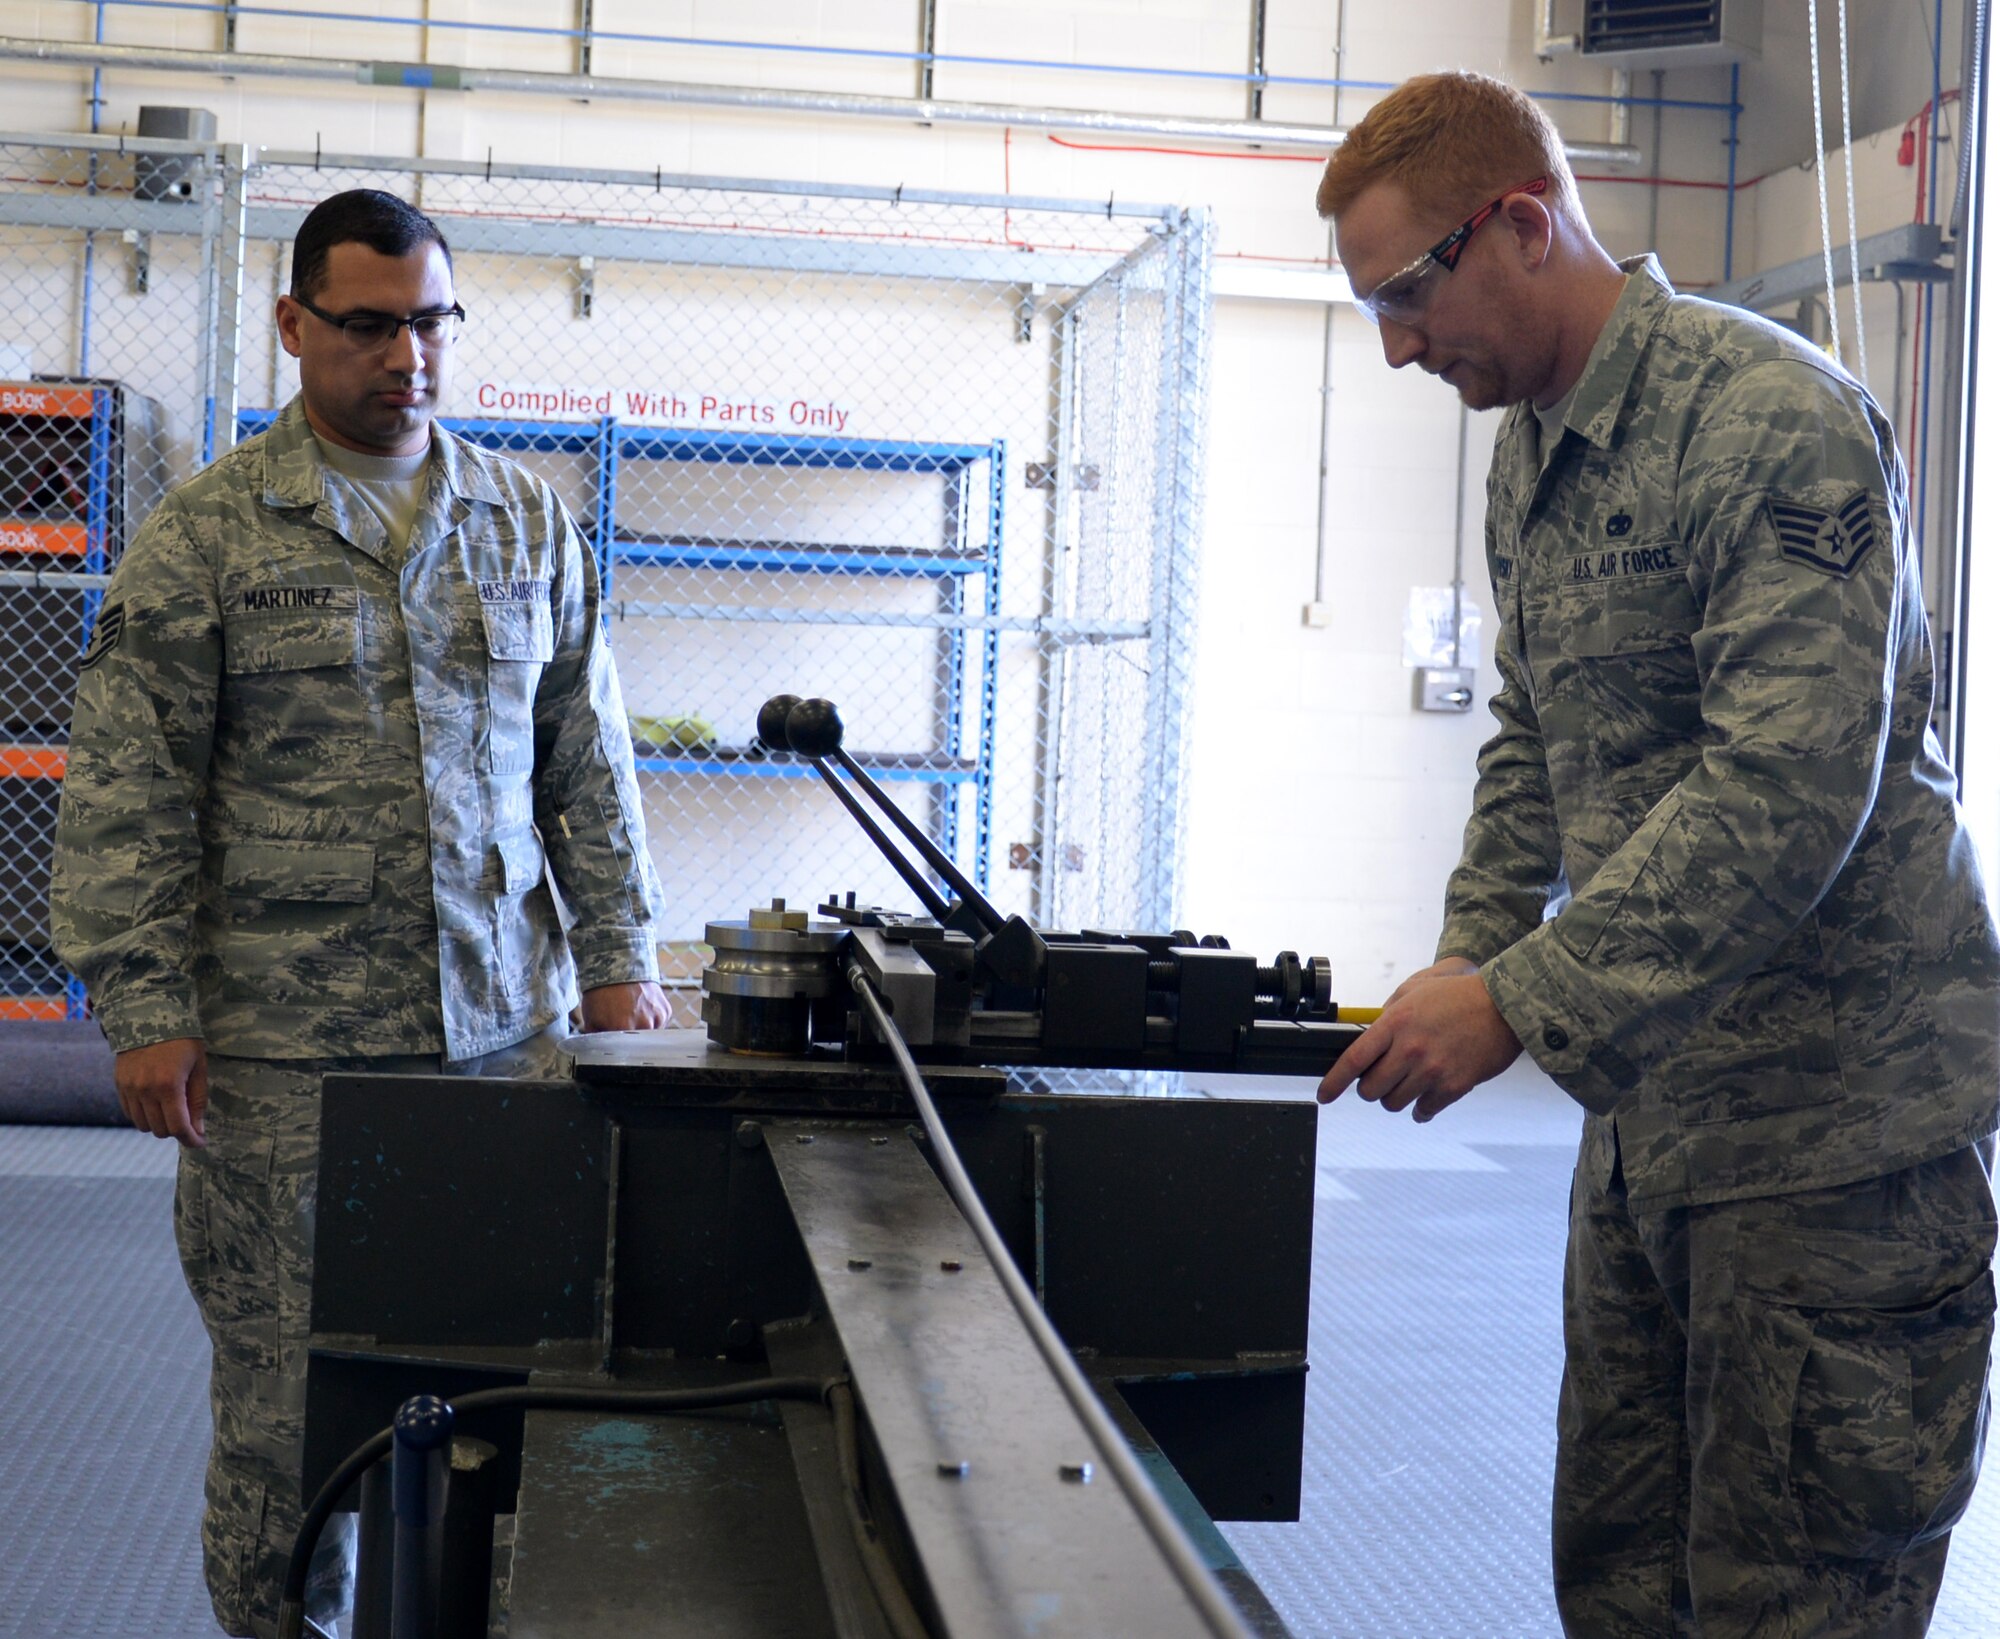 U.S. Air Force Staff Sgt. Jose Martinez, left, 100th Air Refueling Wing NCO in charge of inspections and analysis, ensures U.S. Air Force Staff Sgt. Zachary Sidlovsky, 100th Maintenance Squadron Aircraft Structural Maintenance craftsman, uses equipment safely Oct. 17, 2016, on RAF Mildenhall, England. Martinez and the rest of the safety office periodically go into shops to ensure Airmen are following safe procedures. (U.S. Air Force photo by Gina Randall)